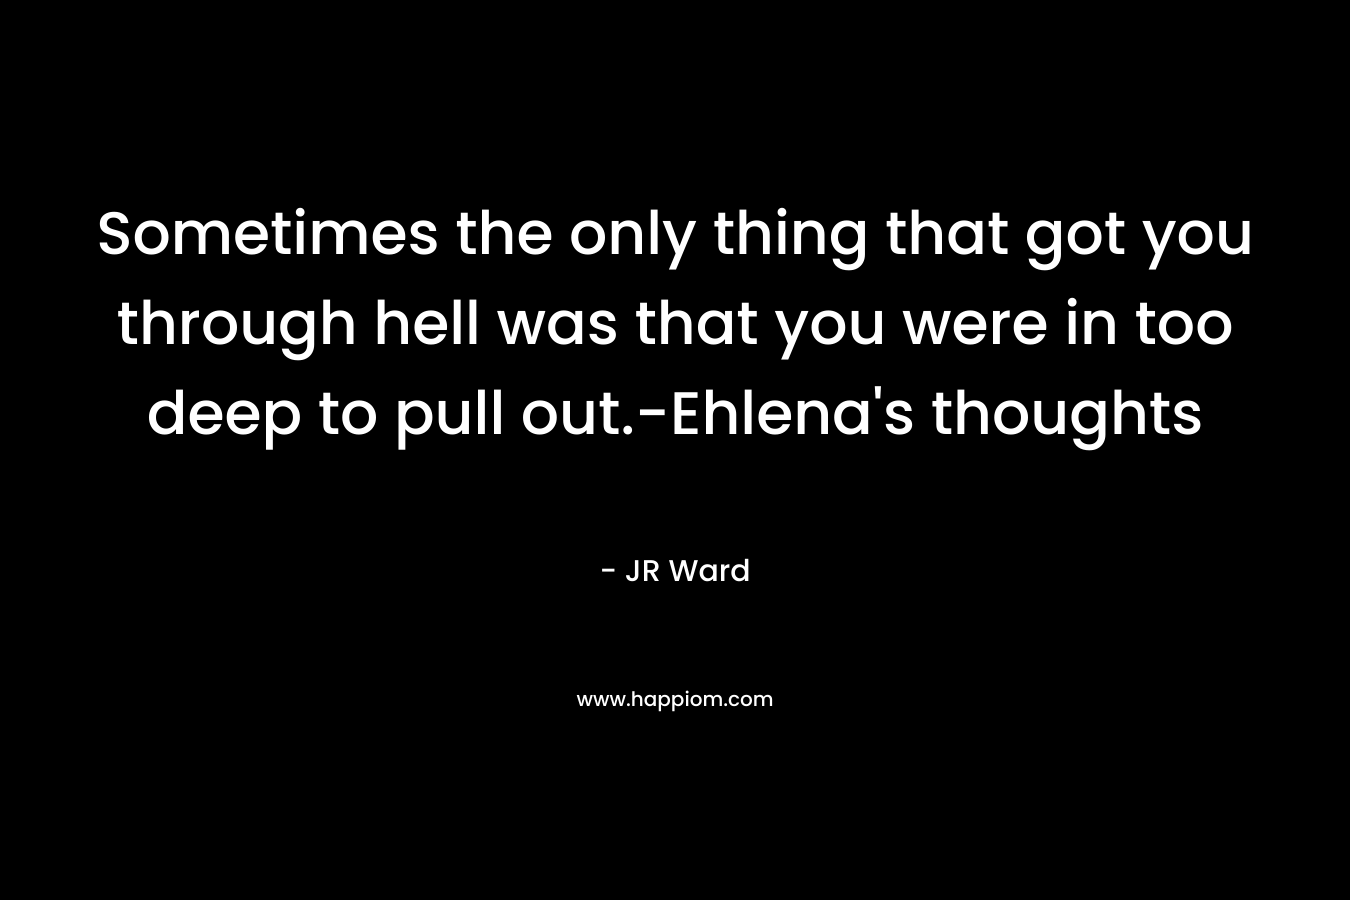 Sometimes the only thing that got you through hell was that you were in too deep to pull out.-Ehlena's thoughts